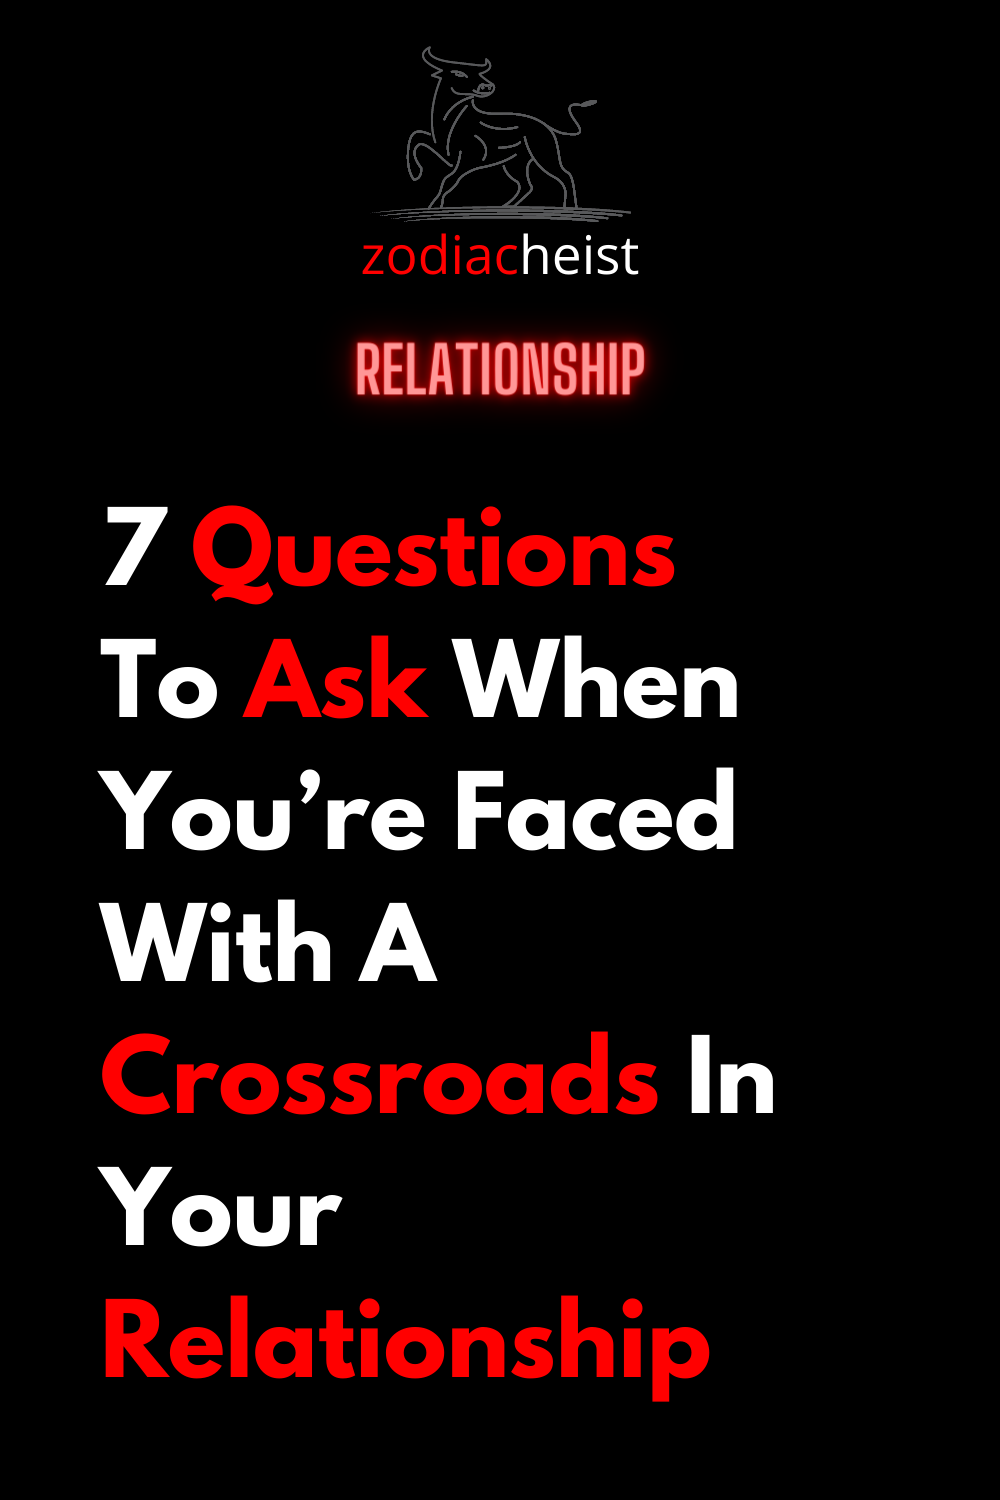 7 Questions To Ask When You’re Faced With A Crossroads In Your Relationship